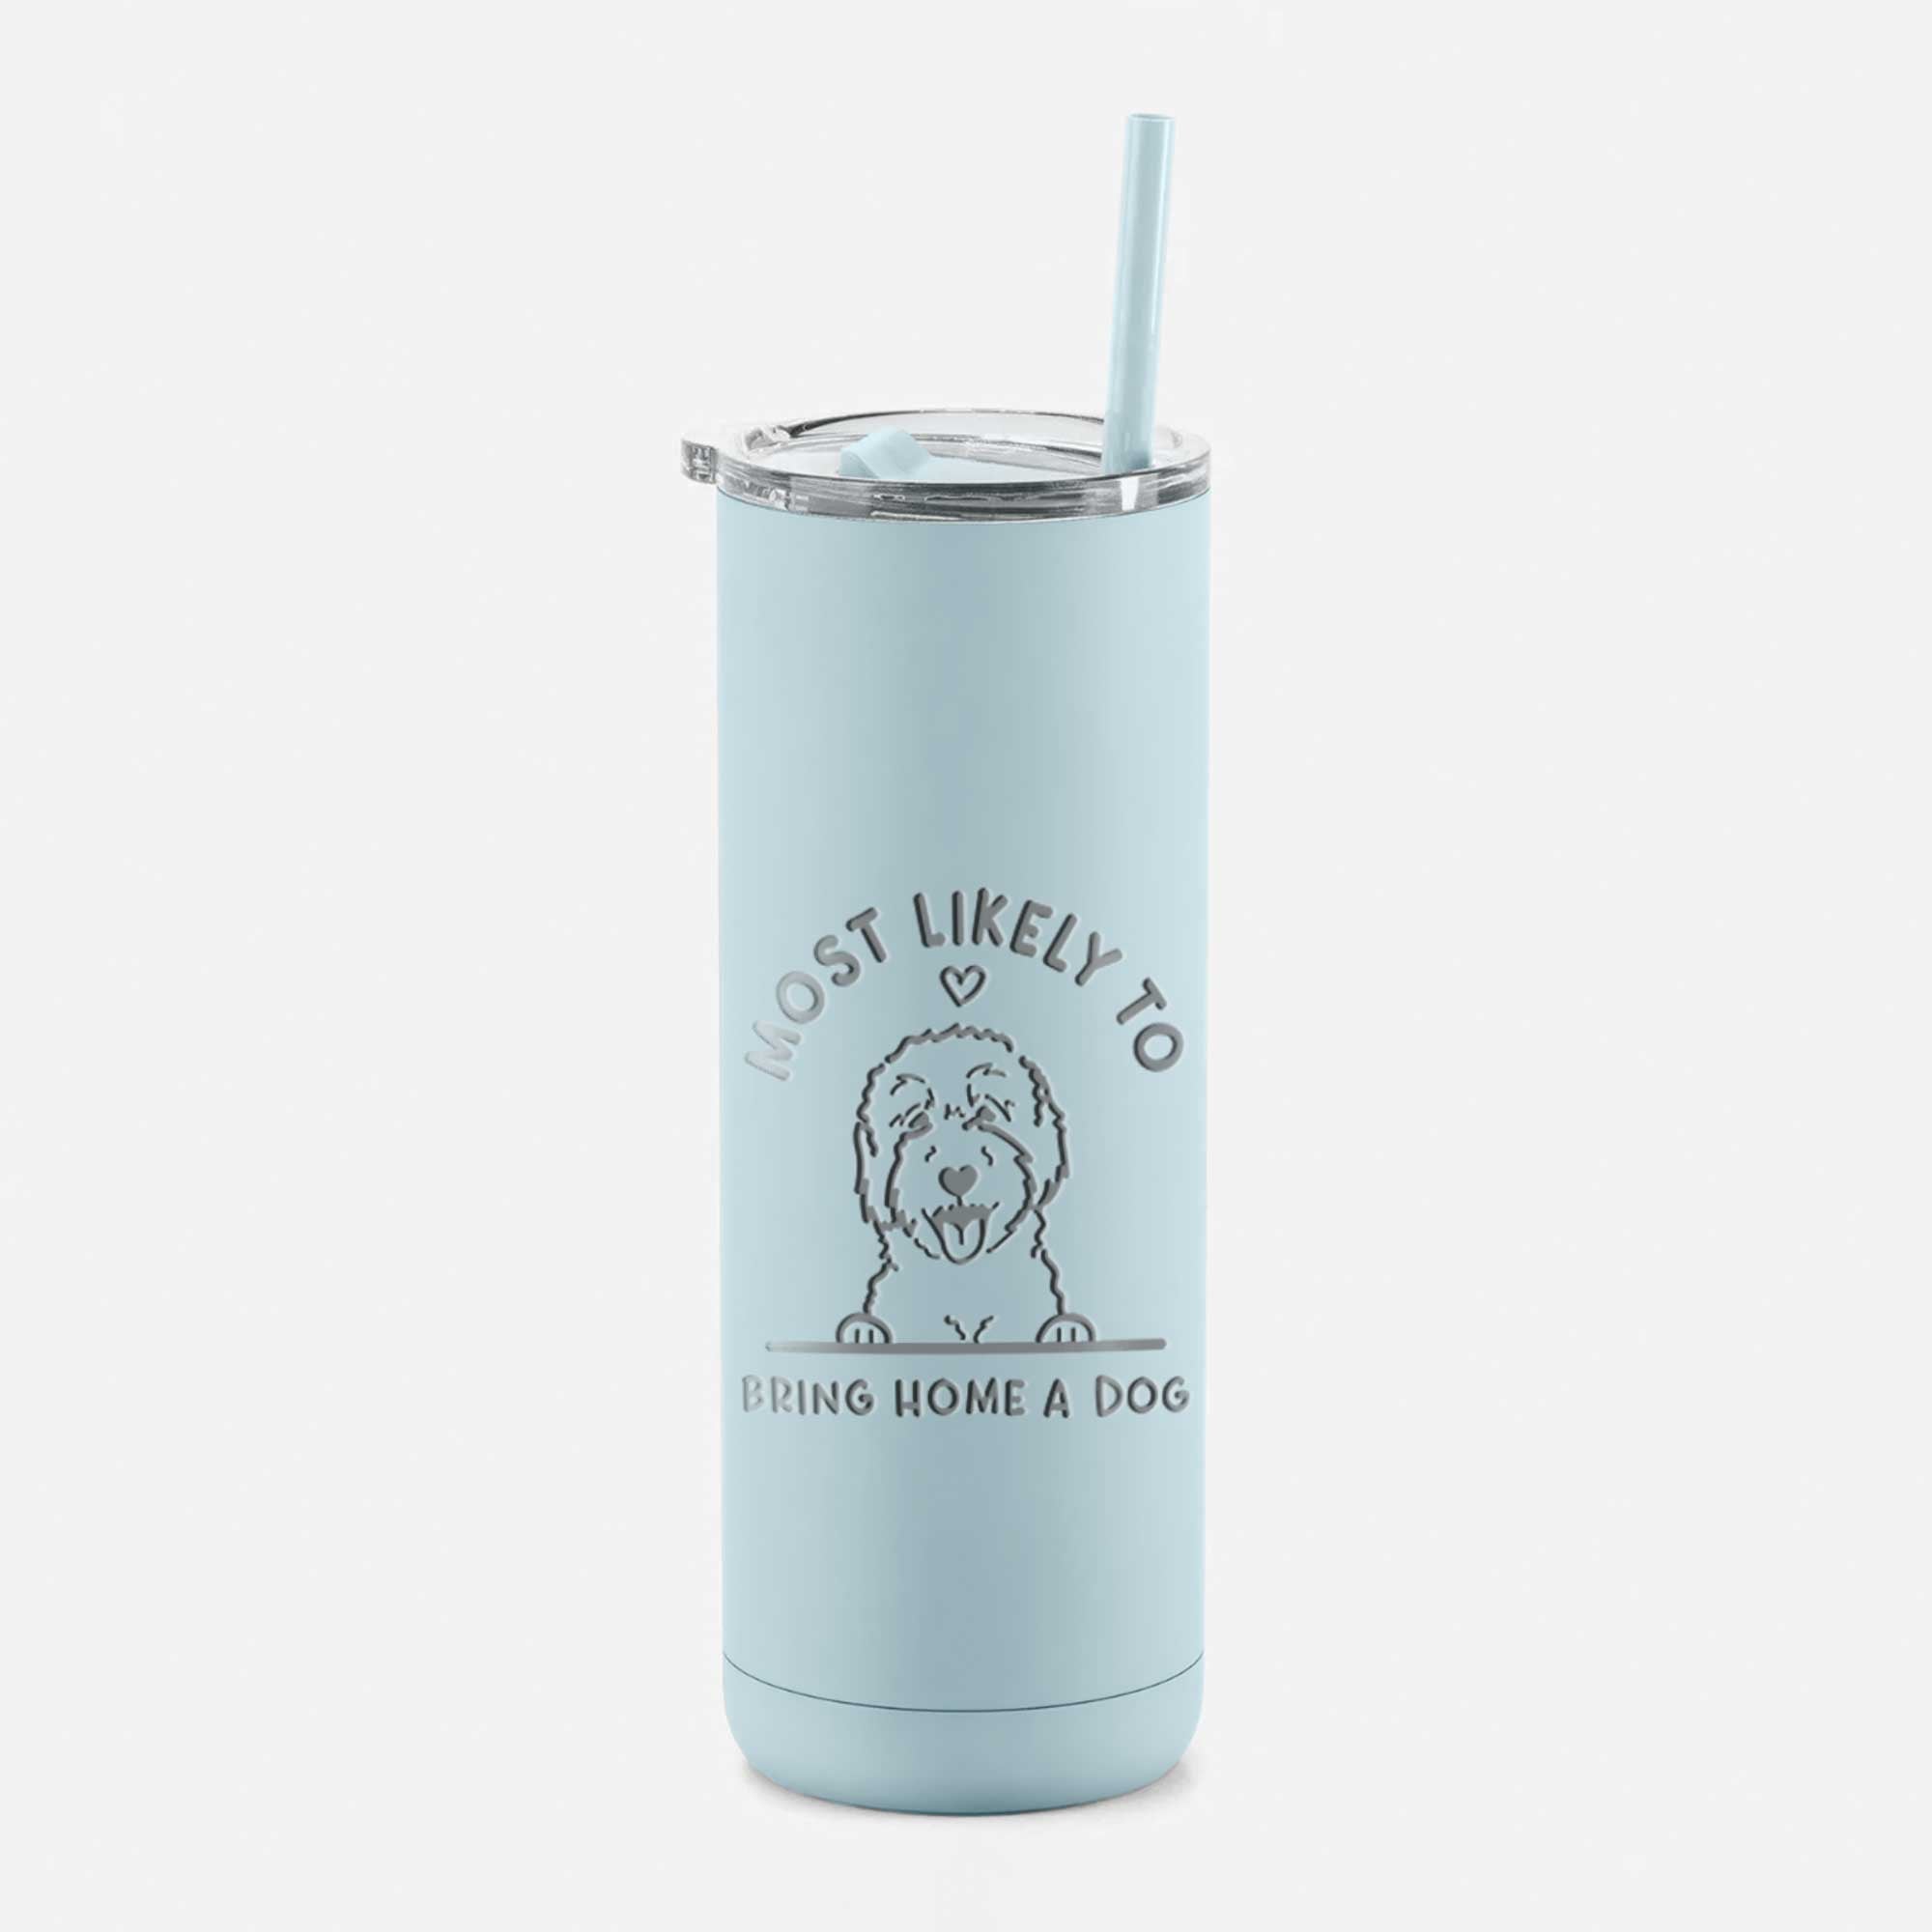 LIMITED EDITION - Most Likely to Bring Home a Dog - 20oz Maker Insulated Tumbler